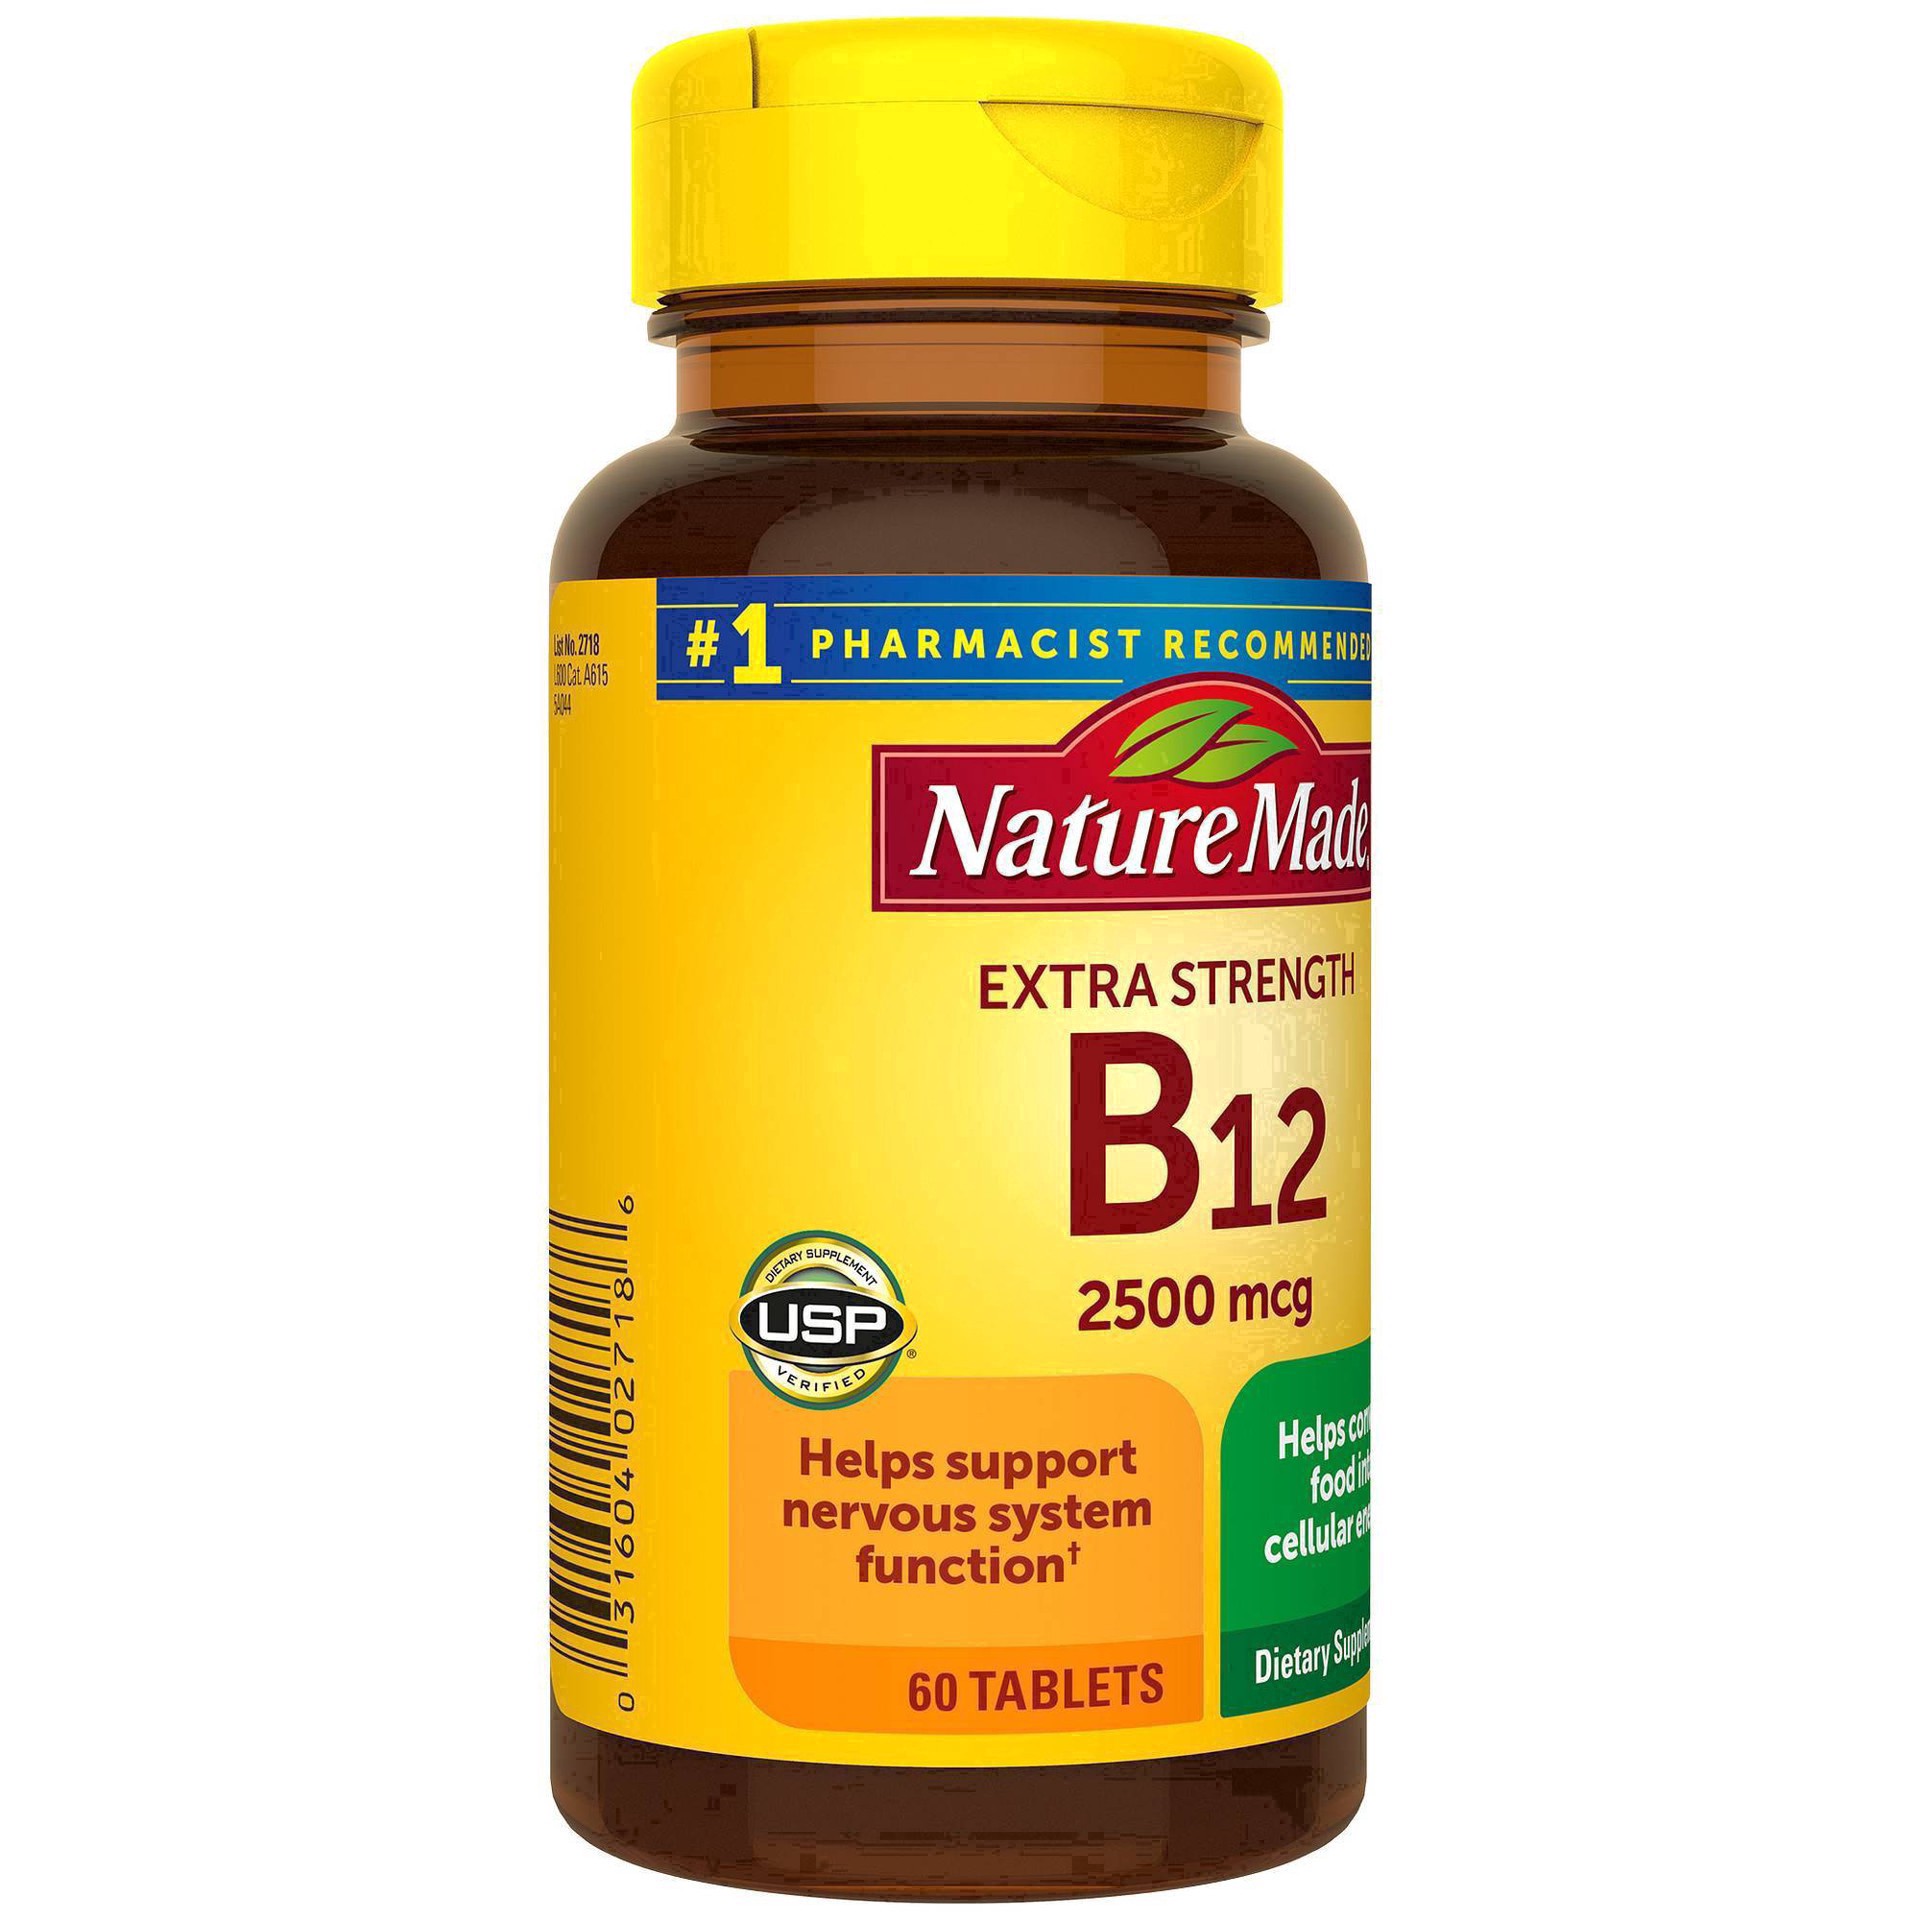 slide 11 of 60, Nature Made Extra Strength Vitamin B12 2500 mcg Tablets for Energy Metabolism Support - 60ct, 60 ct